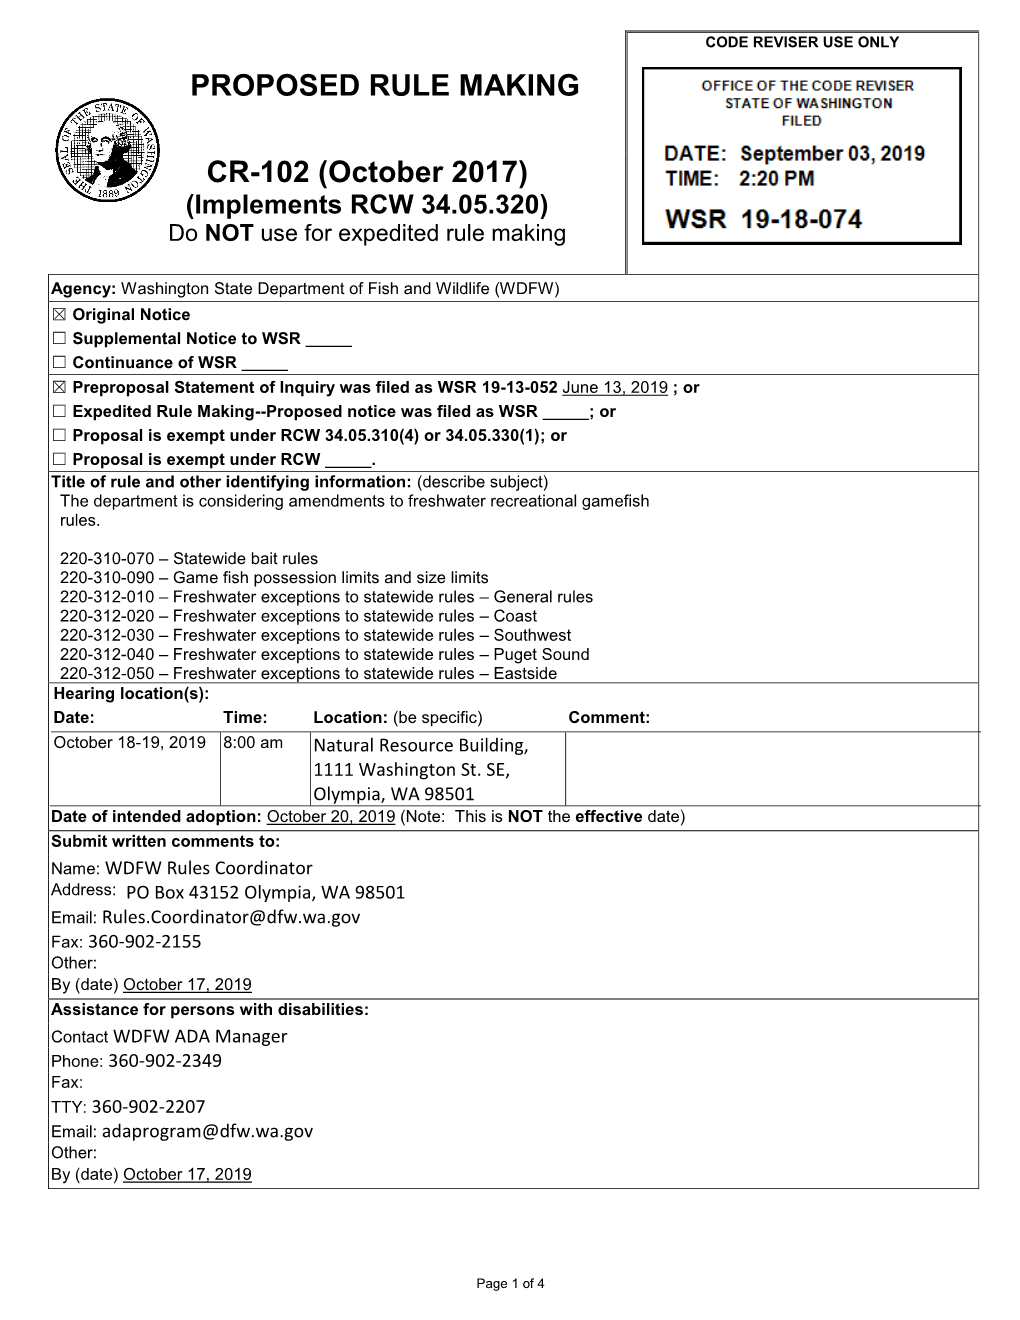 October 2017) (Implements RCW 34.05.320) Do NOT Use for Expedited Rule Making